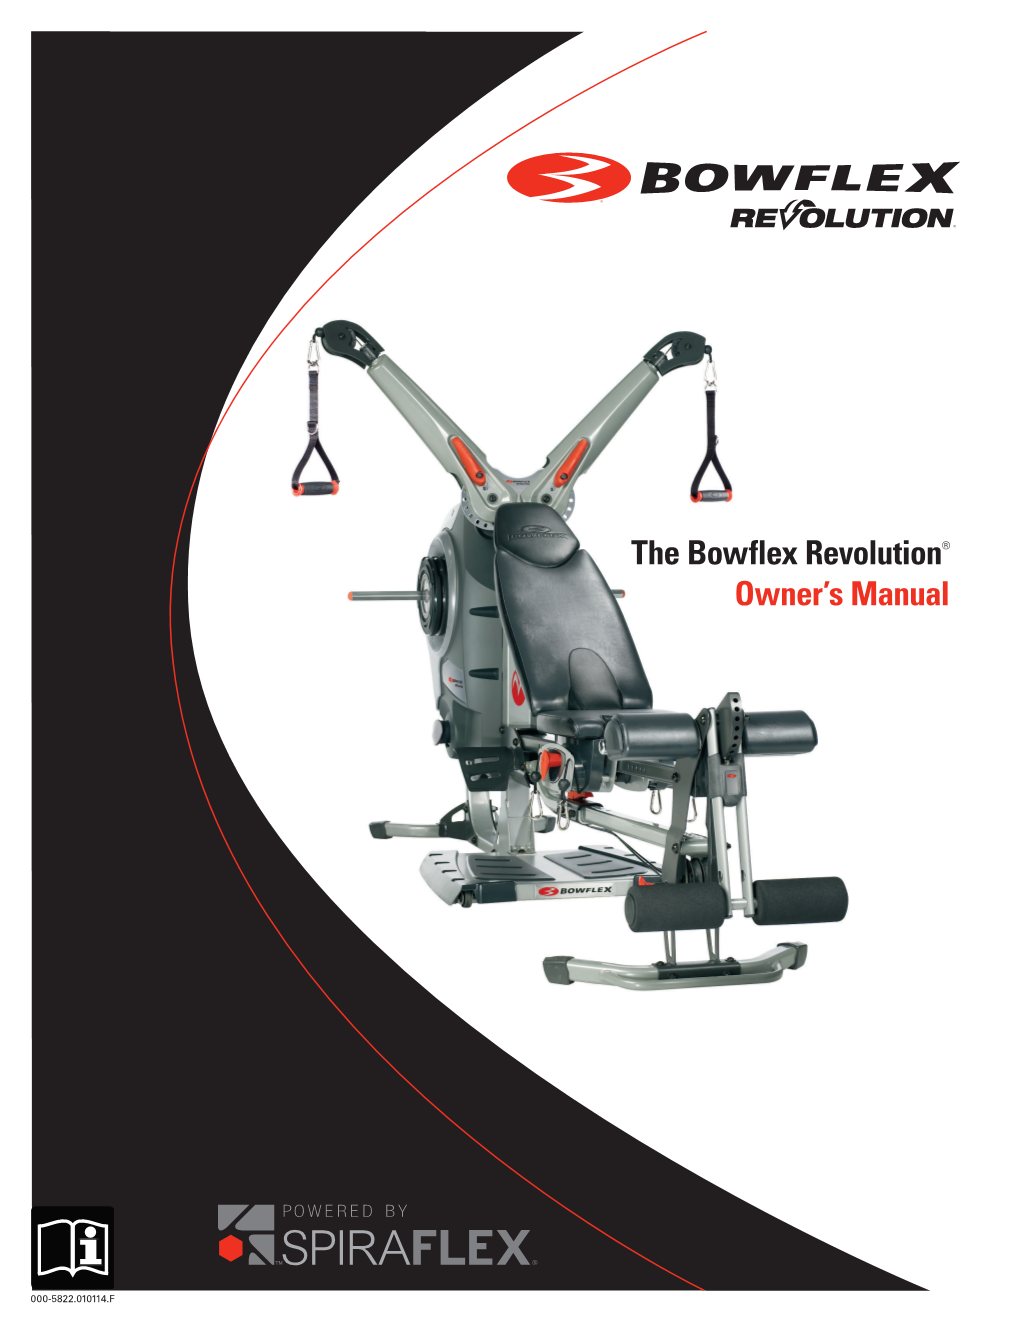 The Bowflex Revolution® Owner's Manual